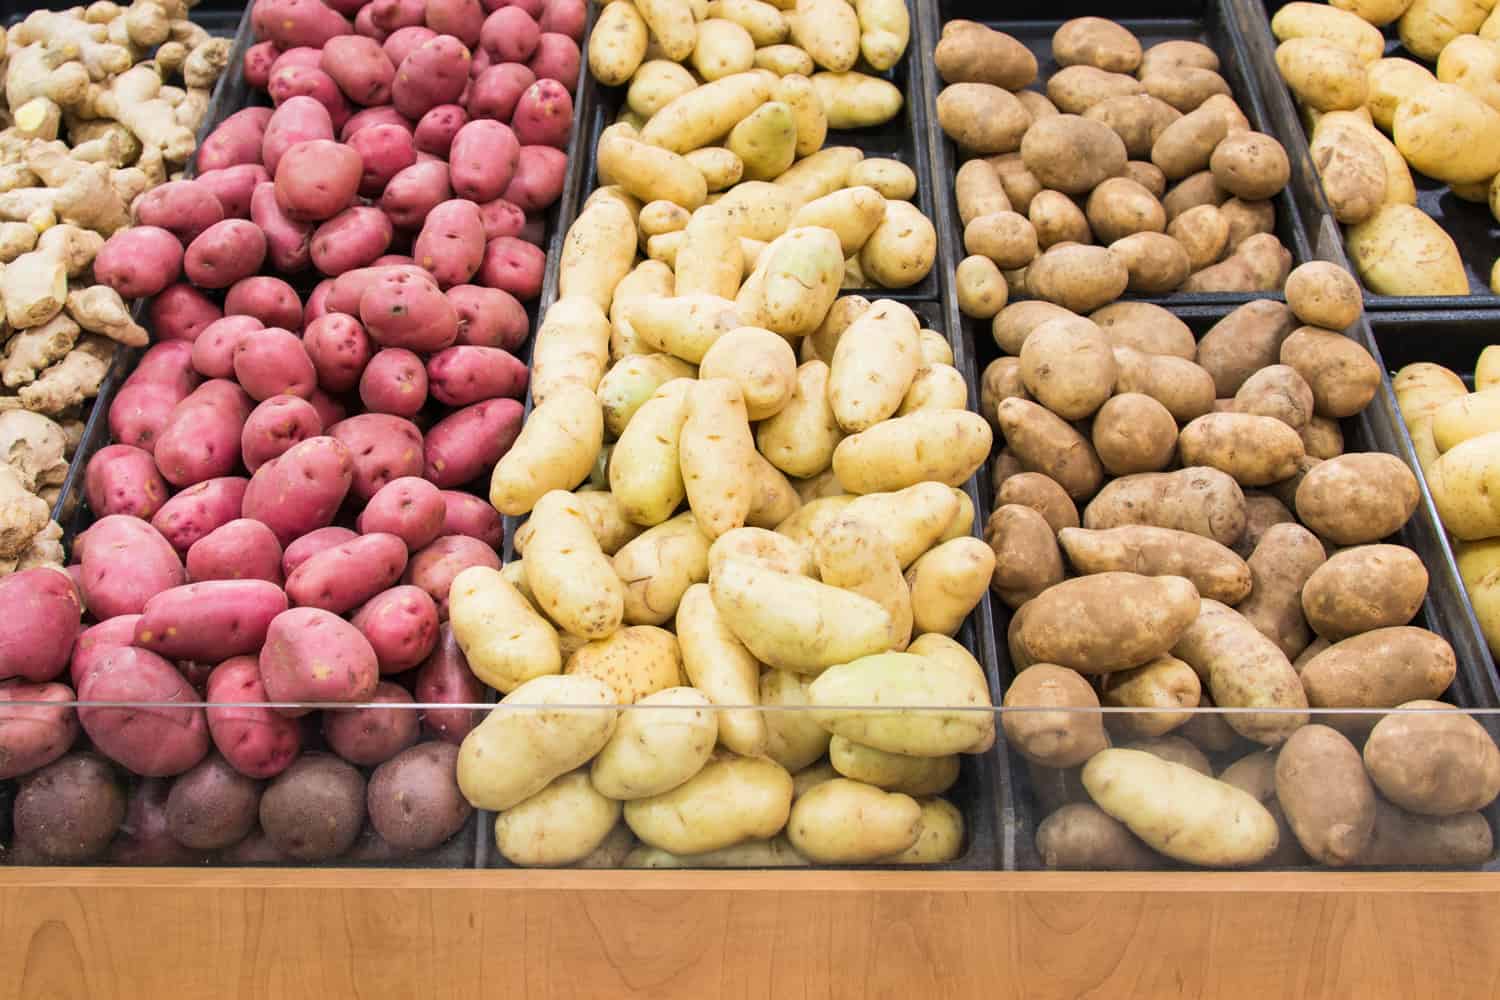 Grocery store displays different colors and varieties of potatoes for people to select thei favourite agricultural produce arranged in lines